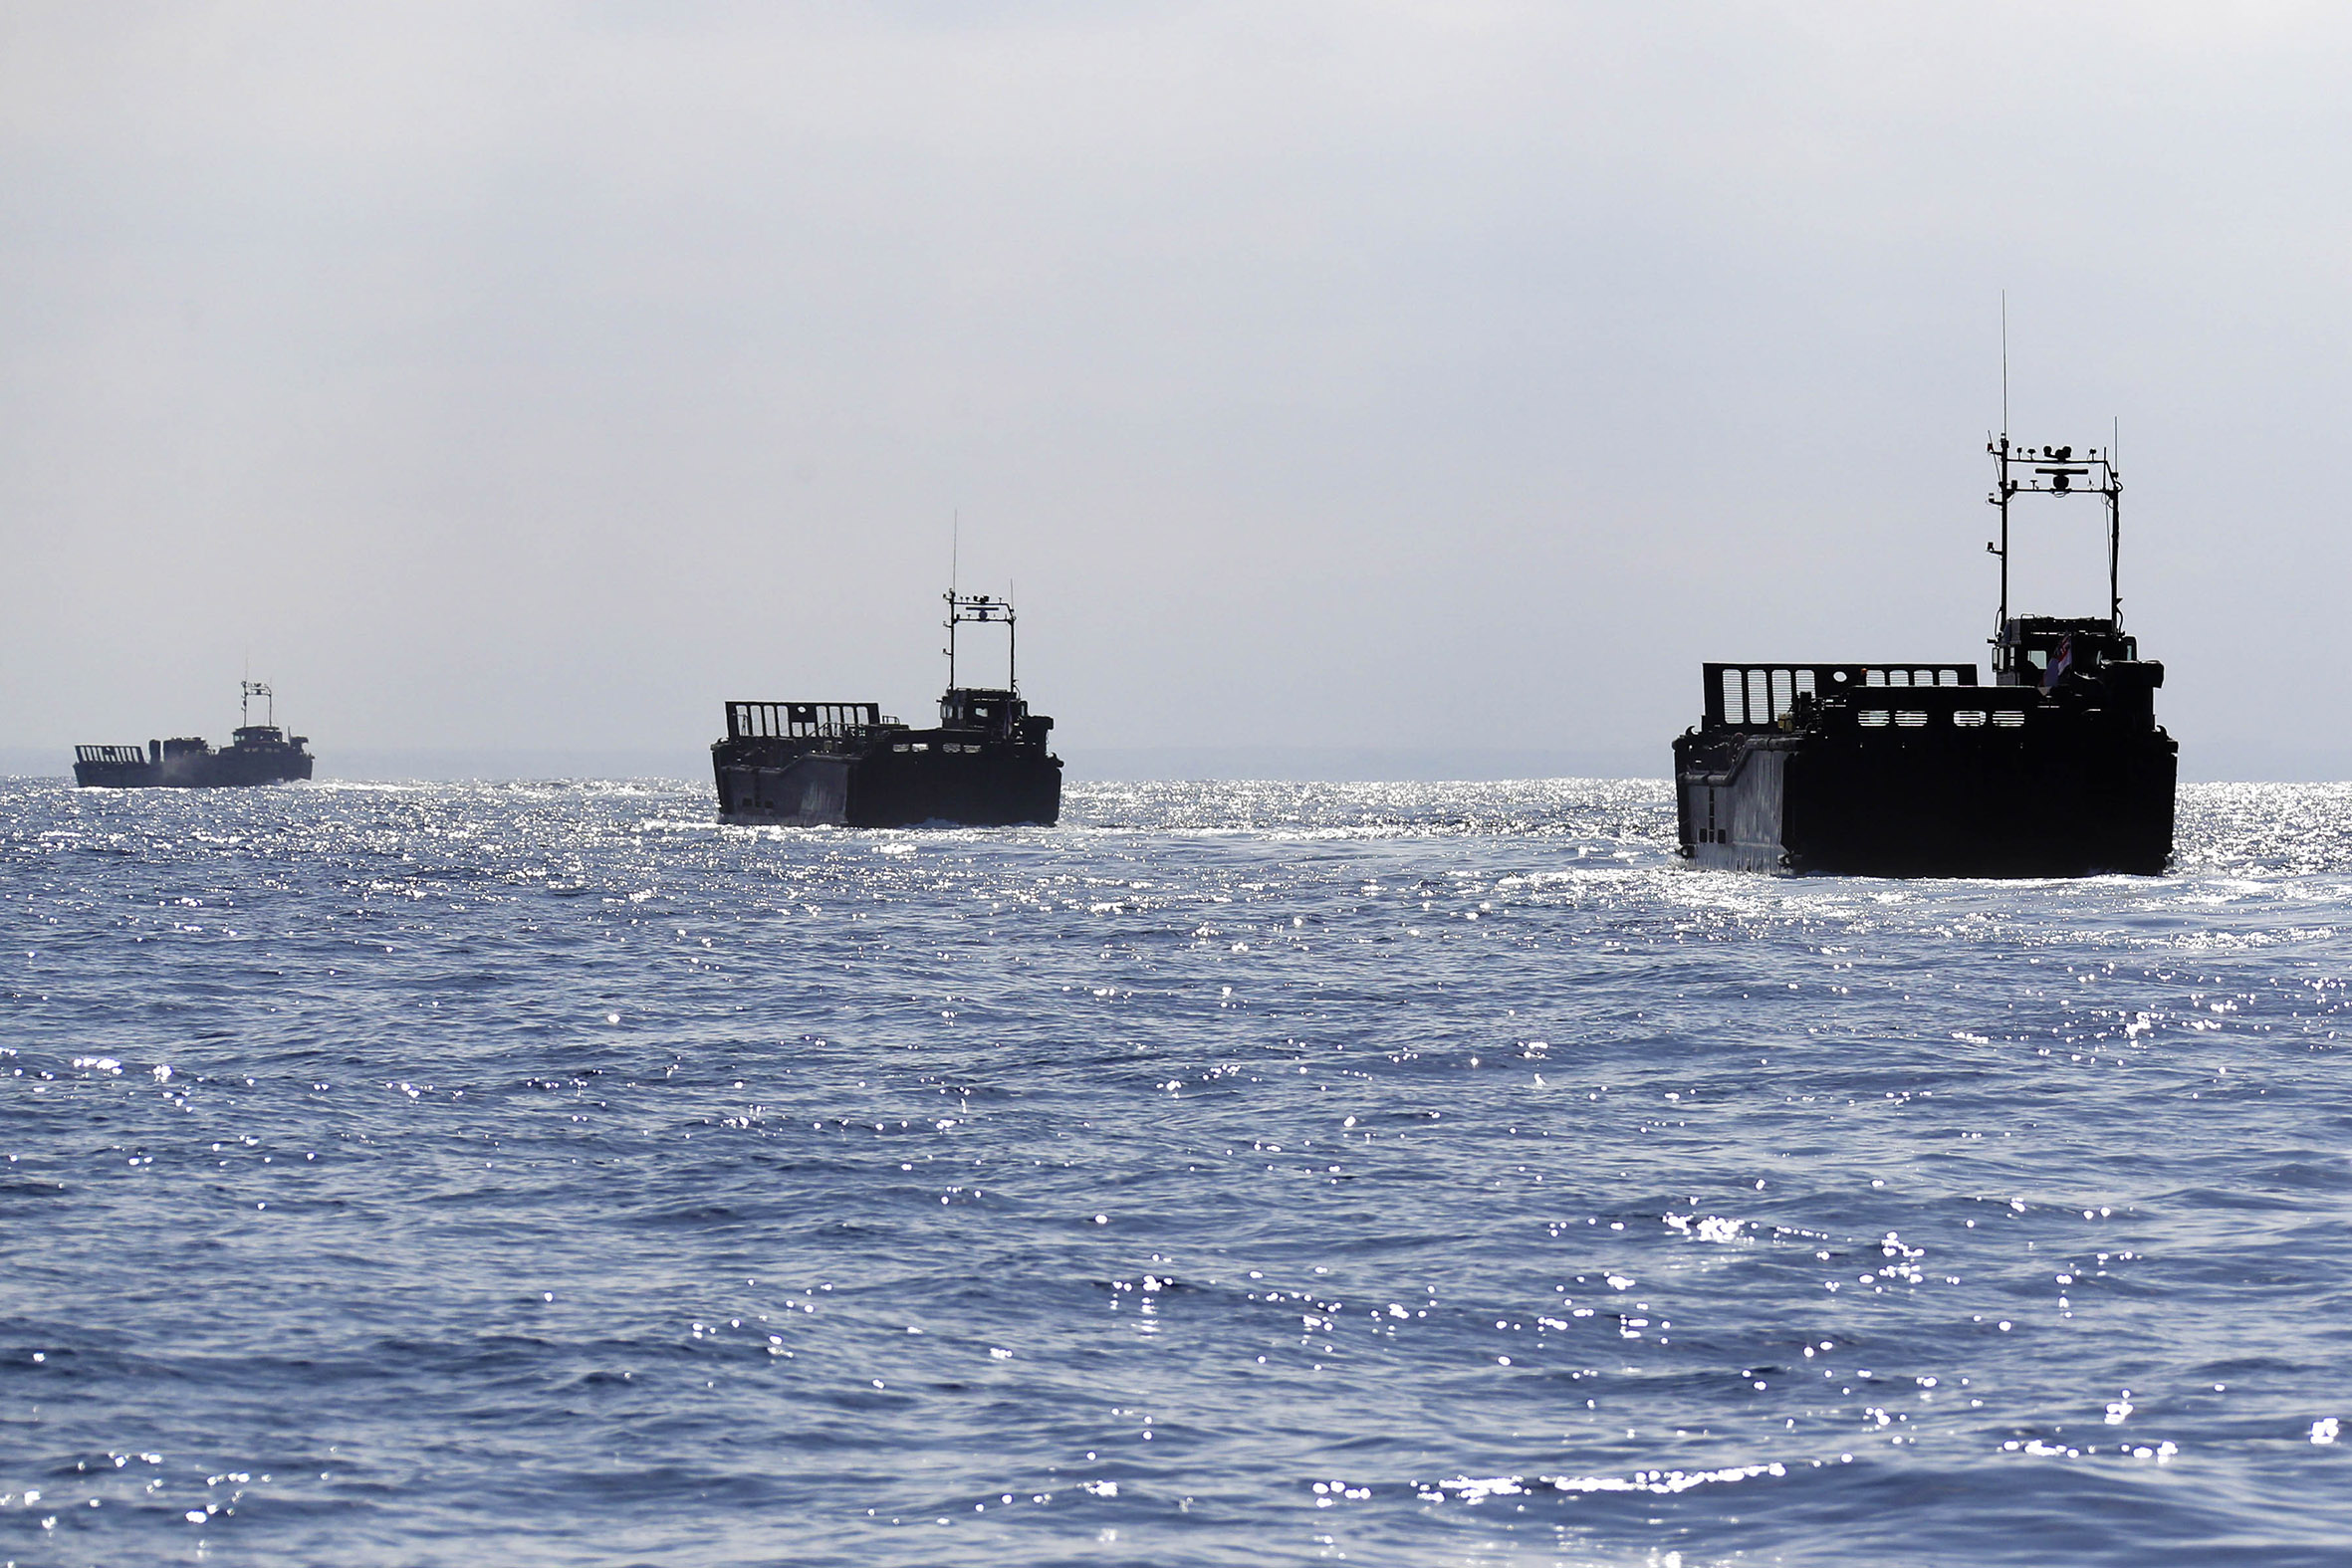 Royal Marine Landing Craft specialists with 4 of their Landing Craft Unit's helped support 4 Egyptian Landing Craft Unit's perform a beach landing as part of a series of exercises with the Egyptian Navy.